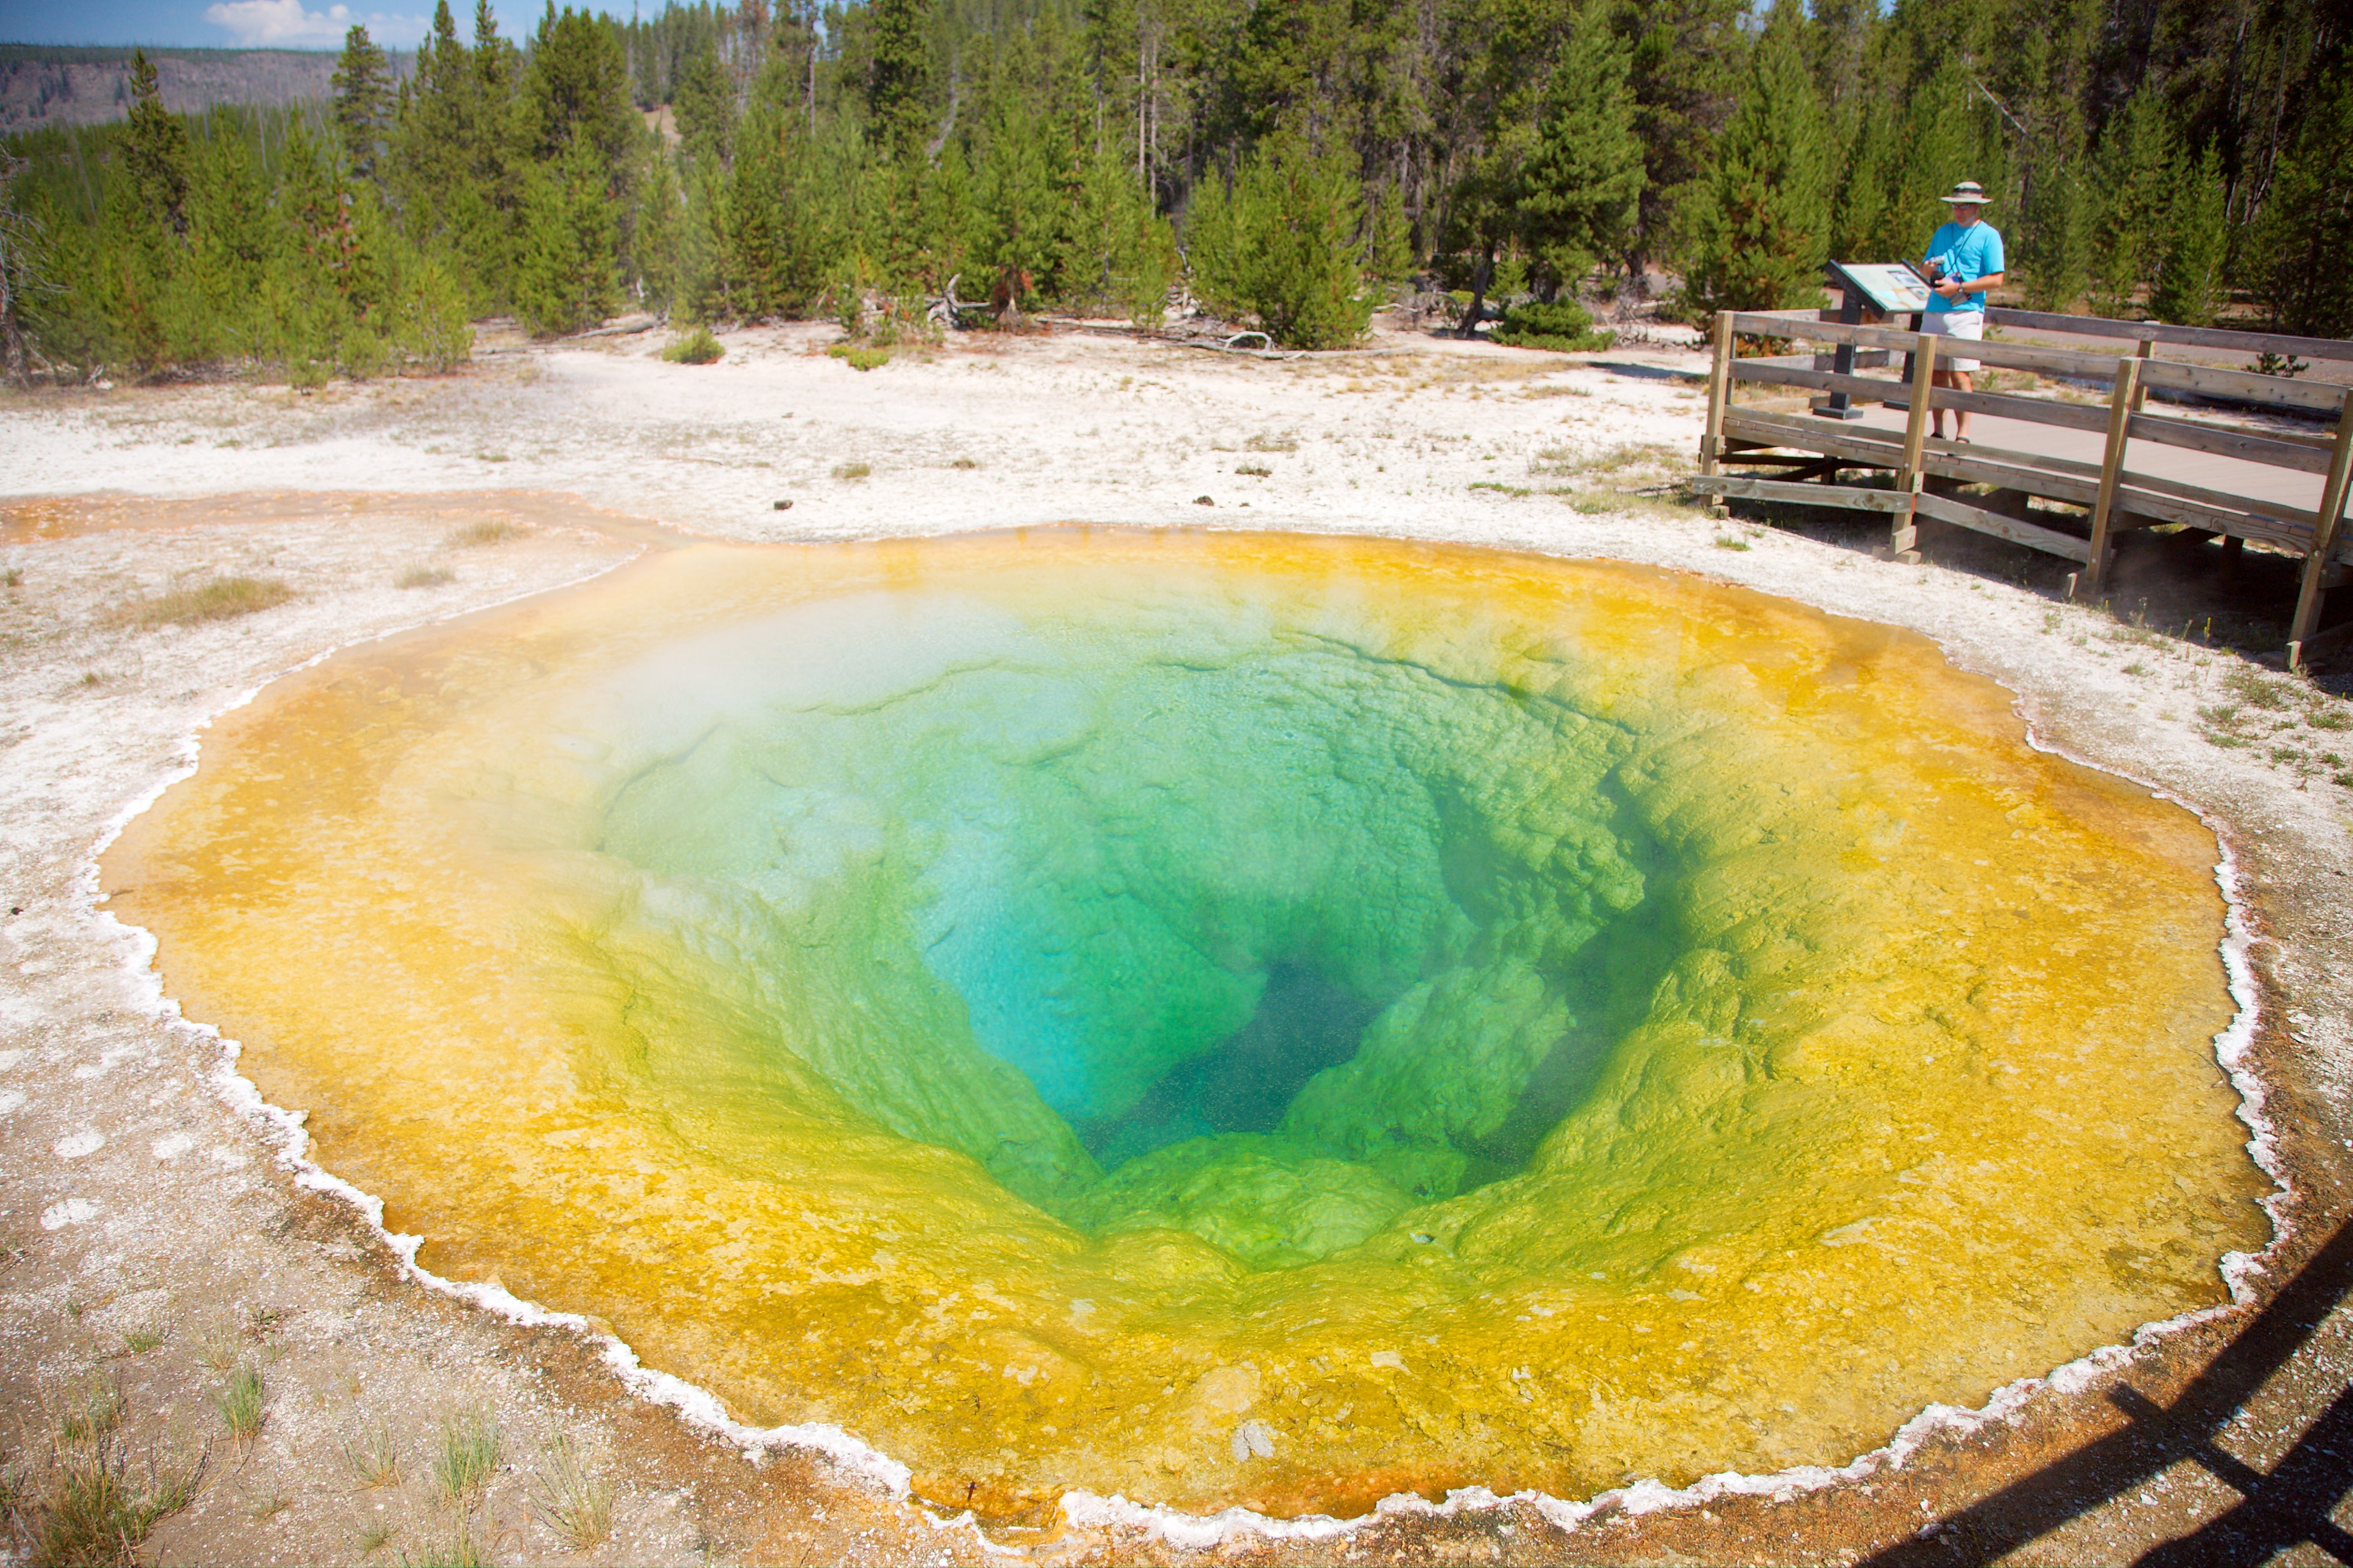 Man Who Was Looking To ‘Hot Pot’ Fell Into Yellowstone Hot Spring And Was Completely Dissolved Within A Day